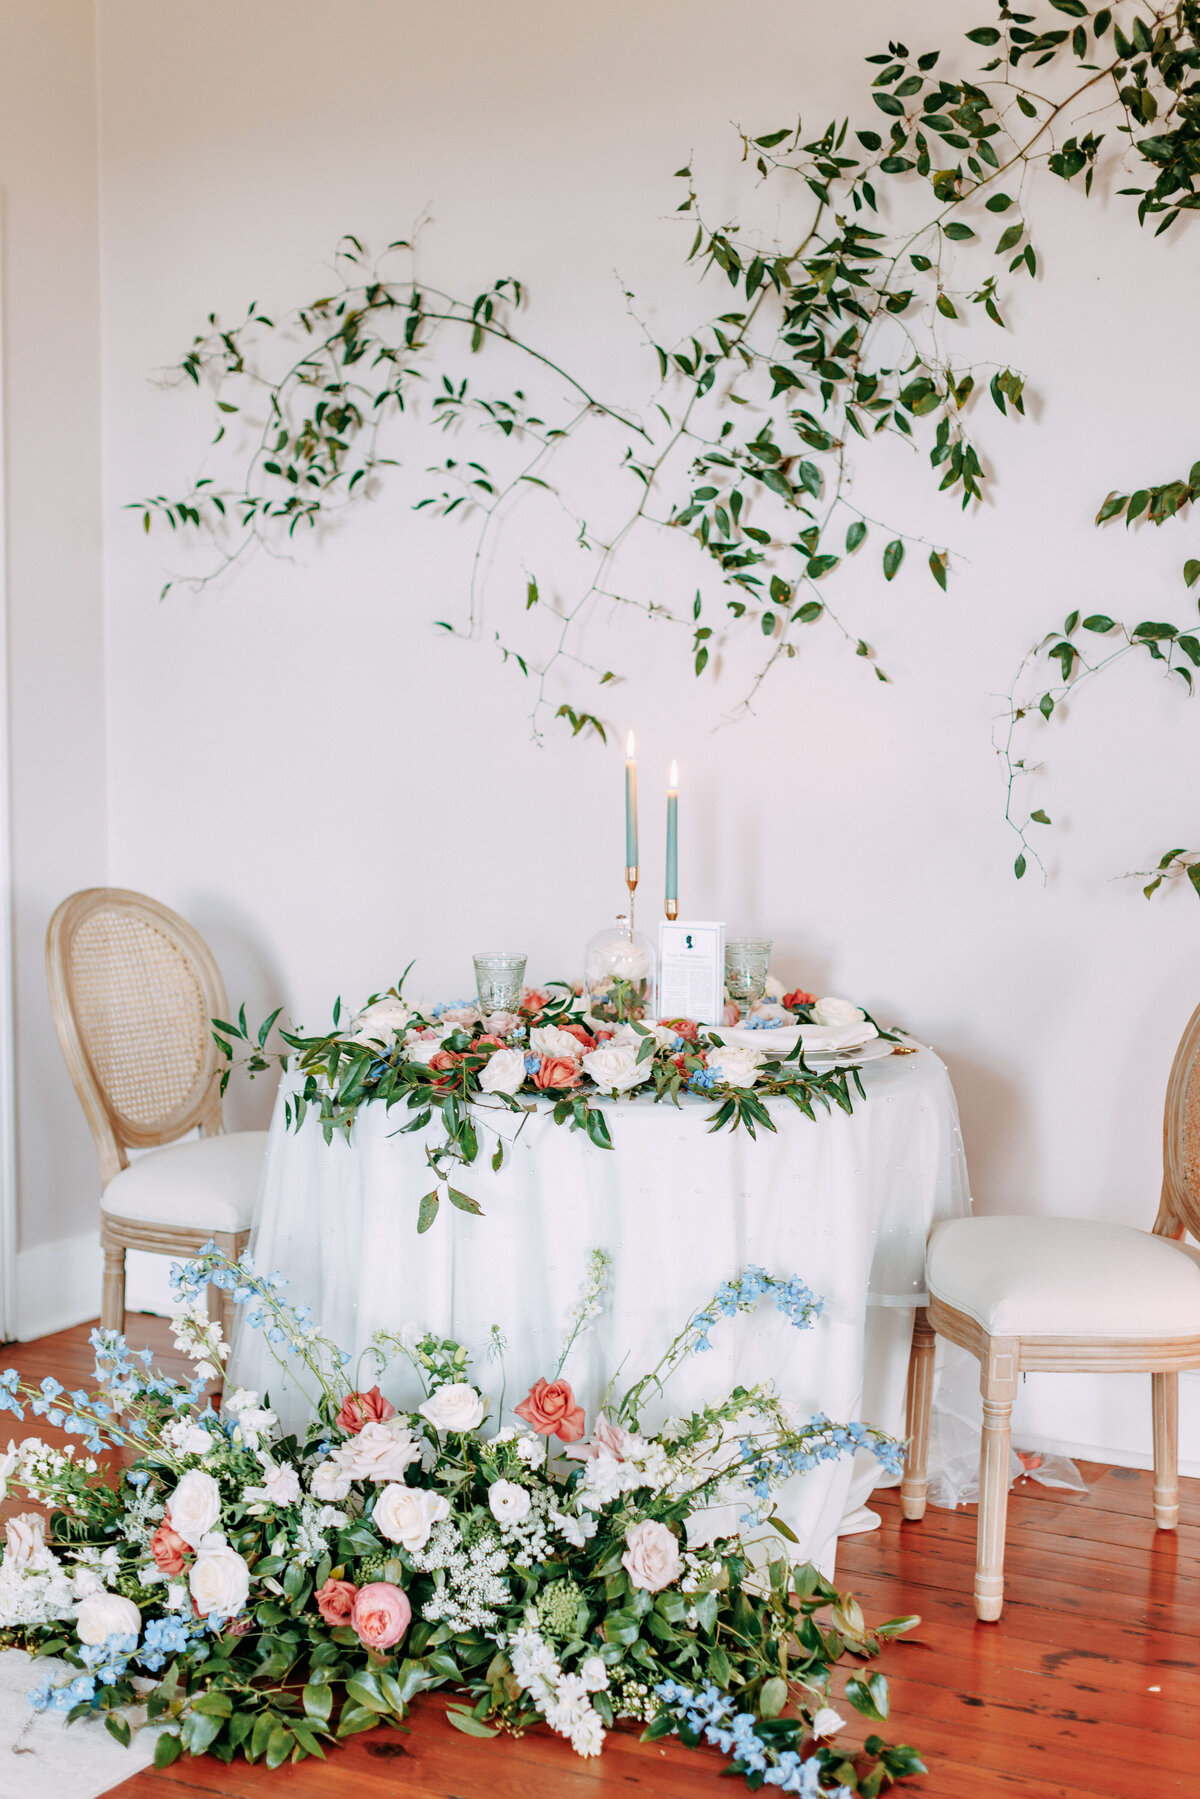 table for 2 with large floral displays and greenery